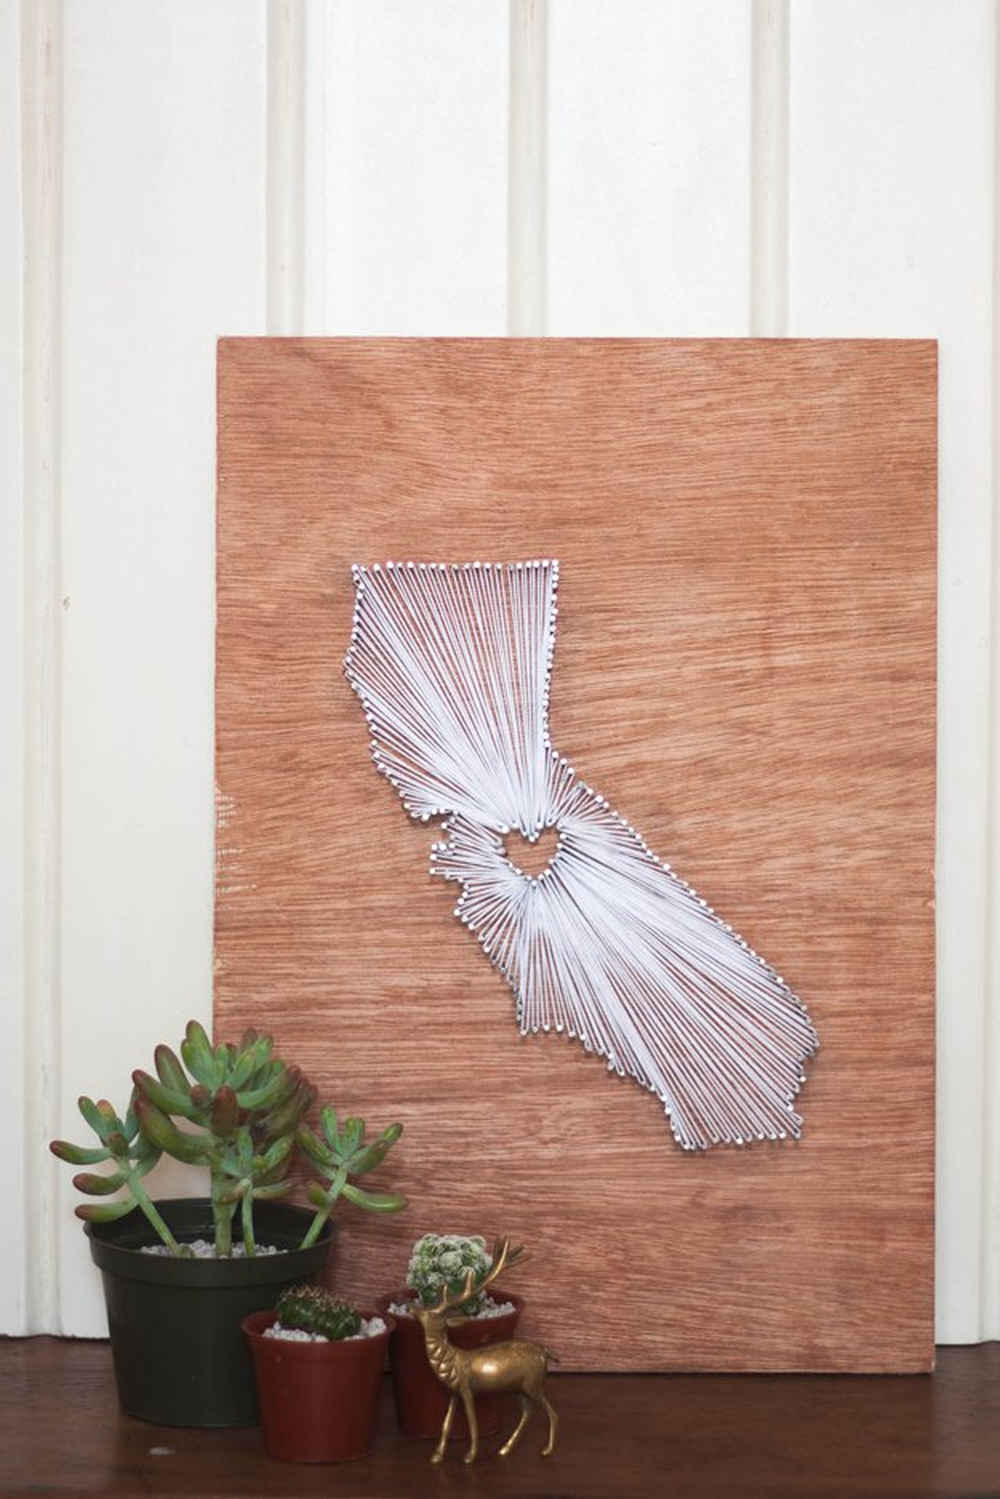 DIY String Art Tutorial | State Themed Wall Art | DIY Projects